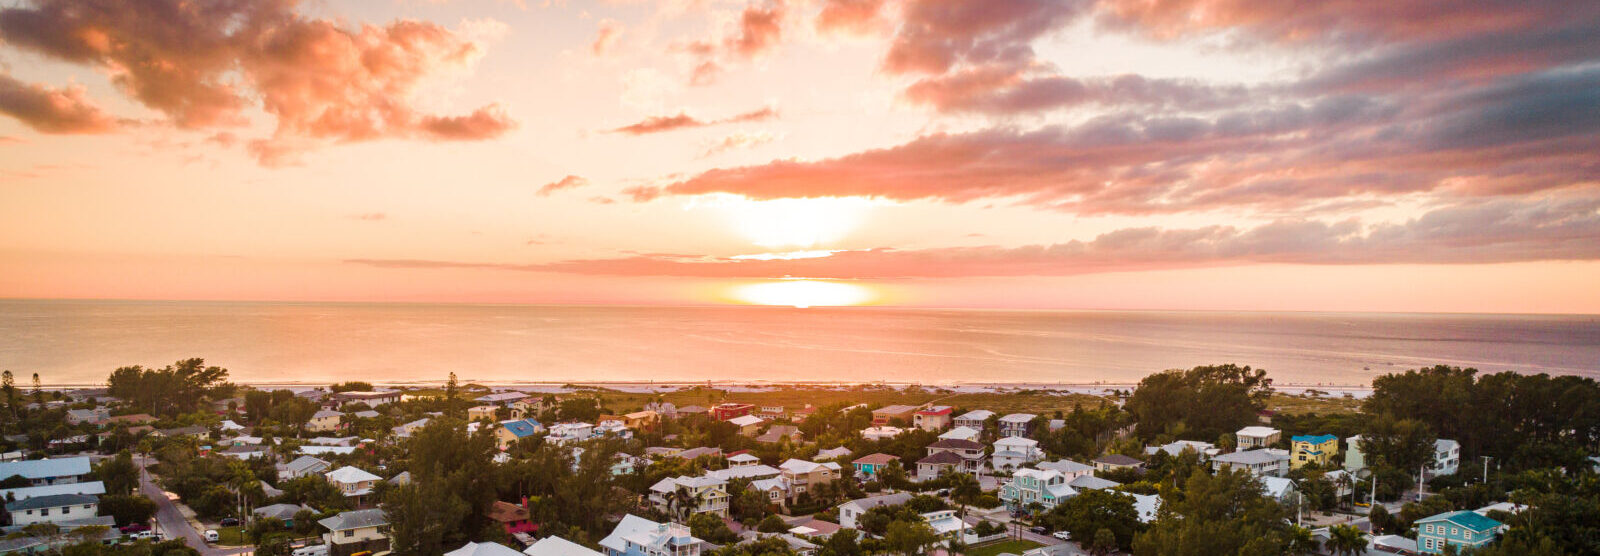 The Best Places To Watch The Sunset On Anna Maria Island Feature Image